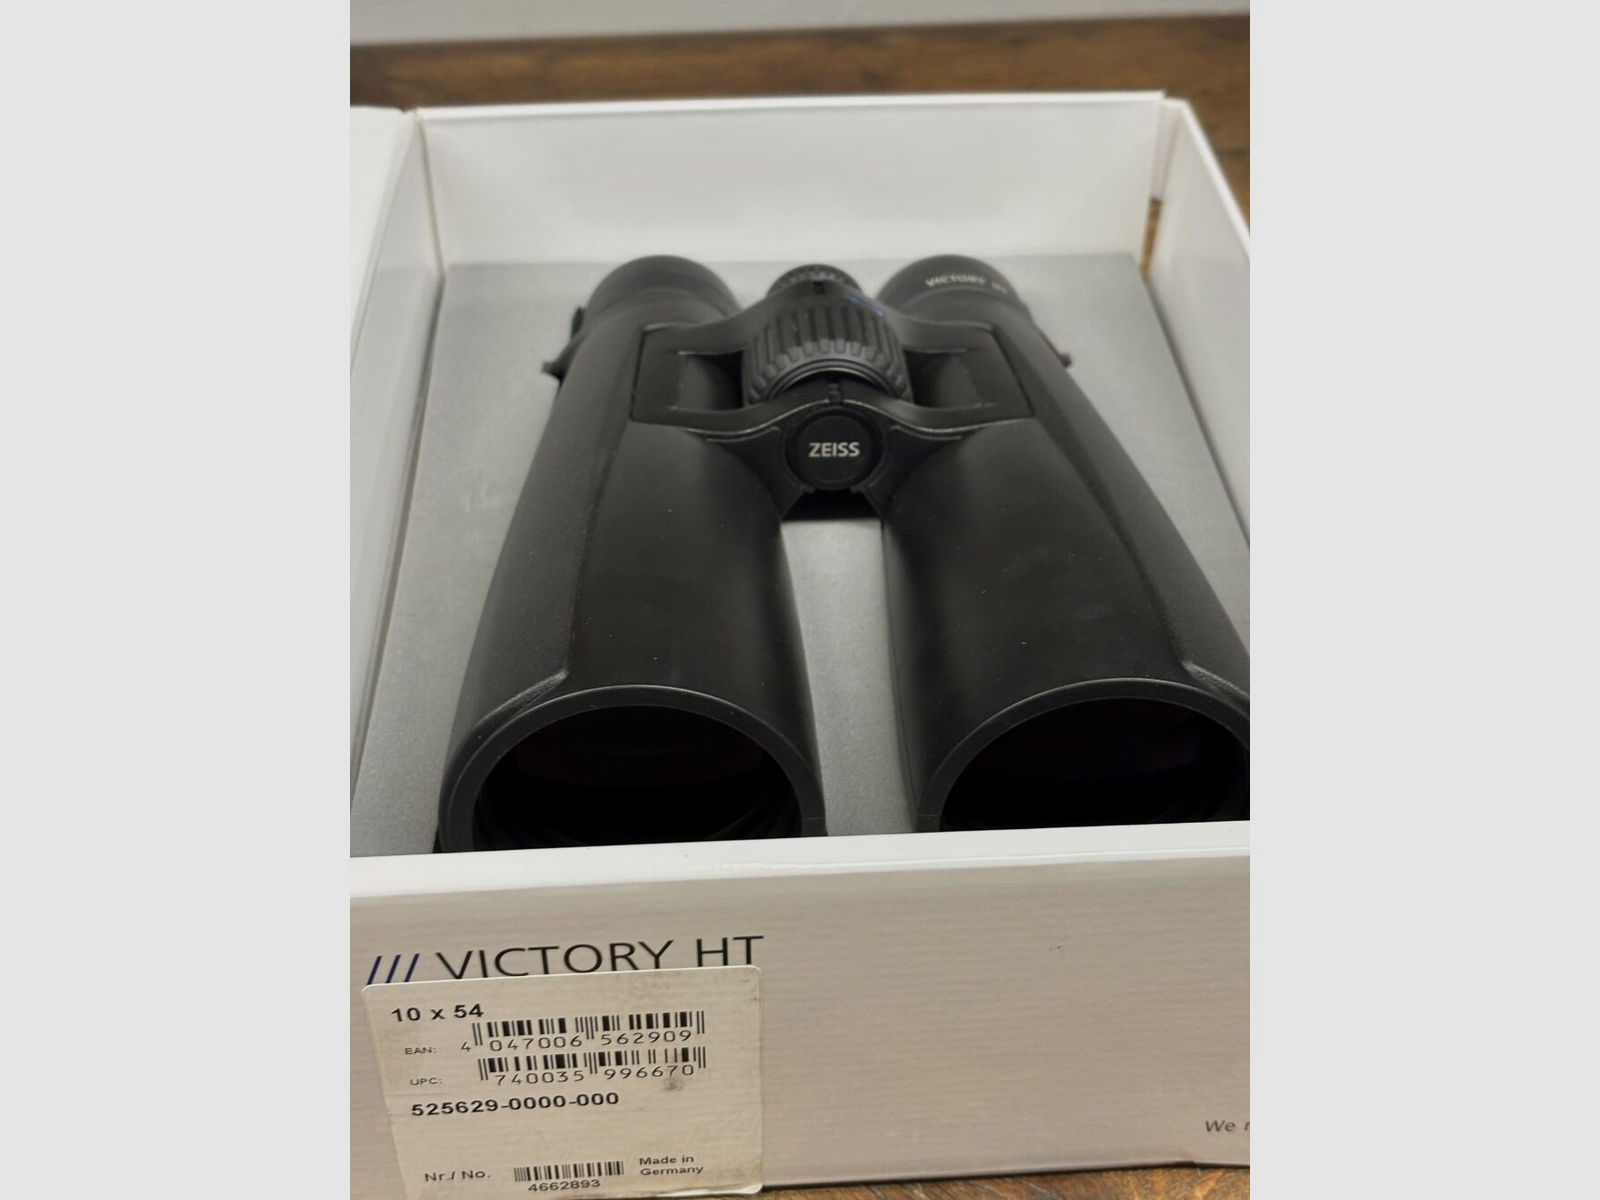 Zeiss	 Victory HT 10x54